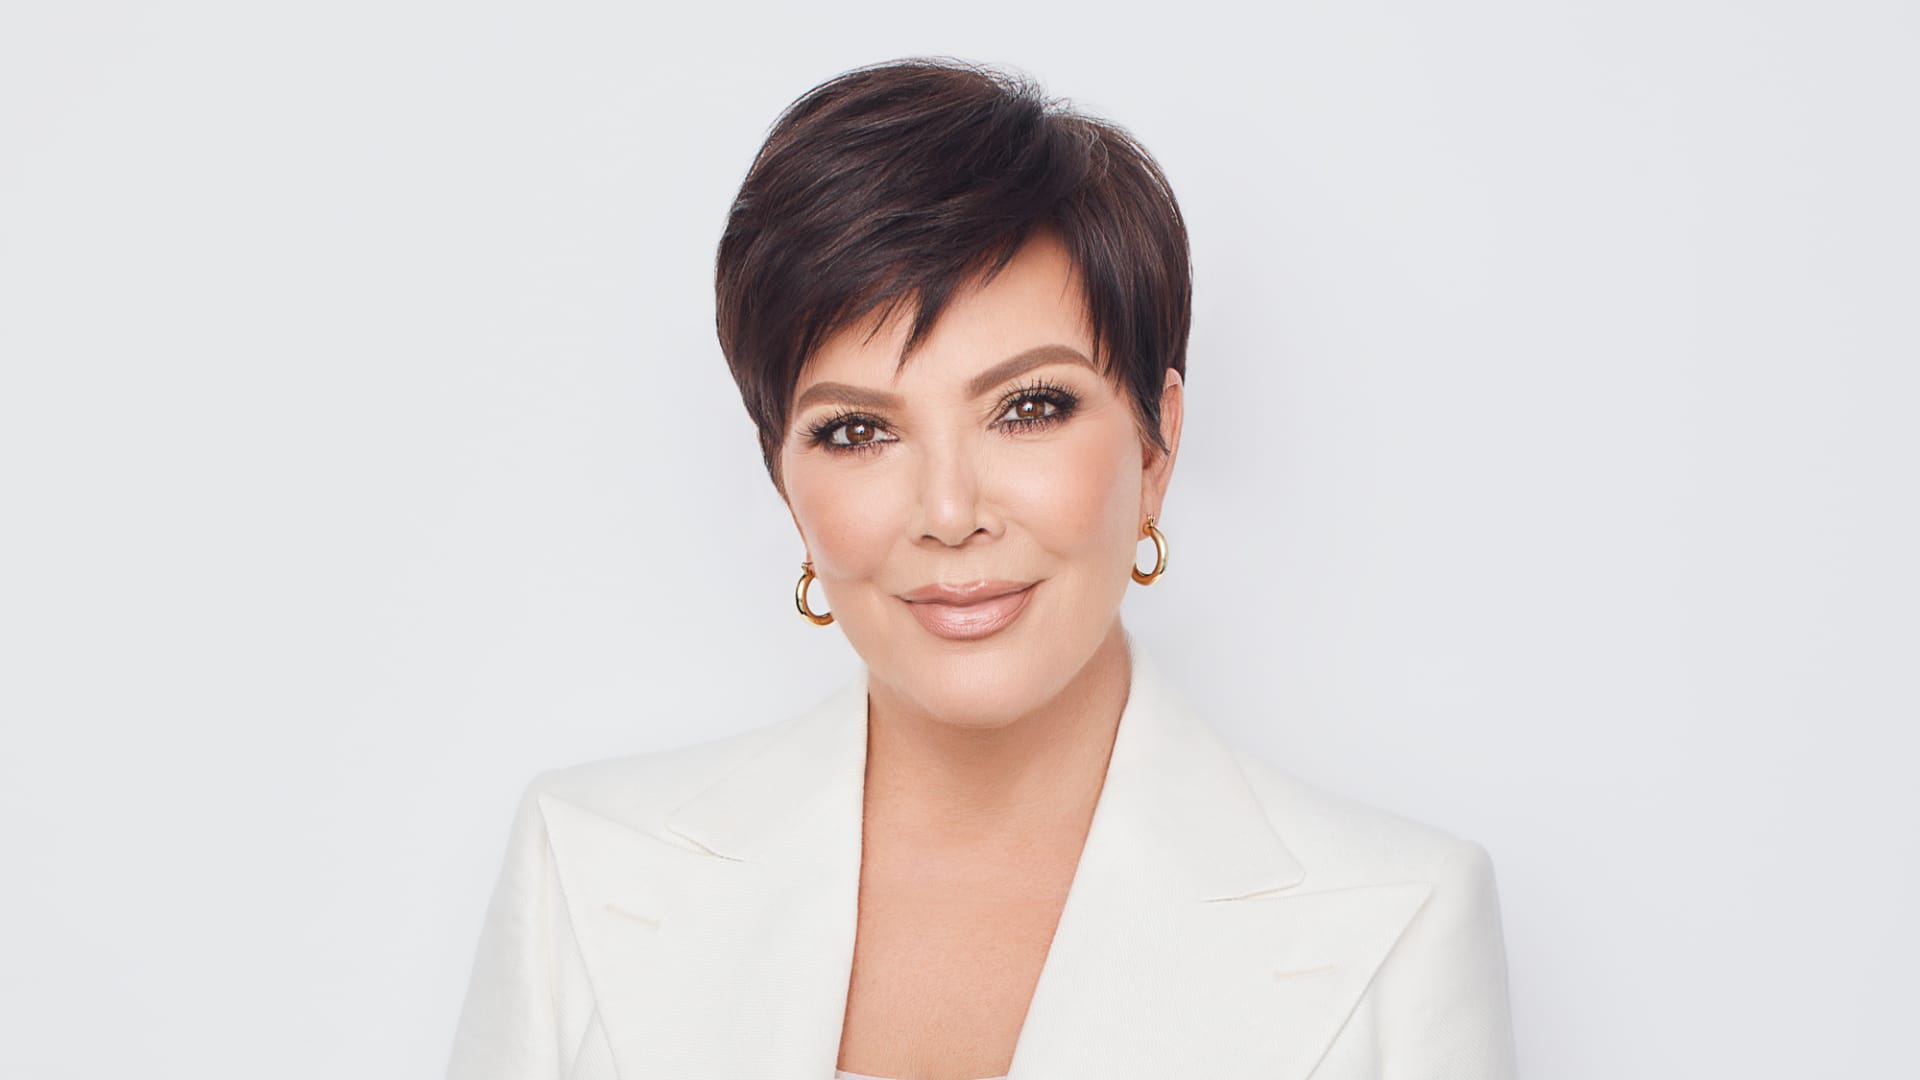 Kris Jenner's Reflection and the Potential of NMN for Emotional Well-B